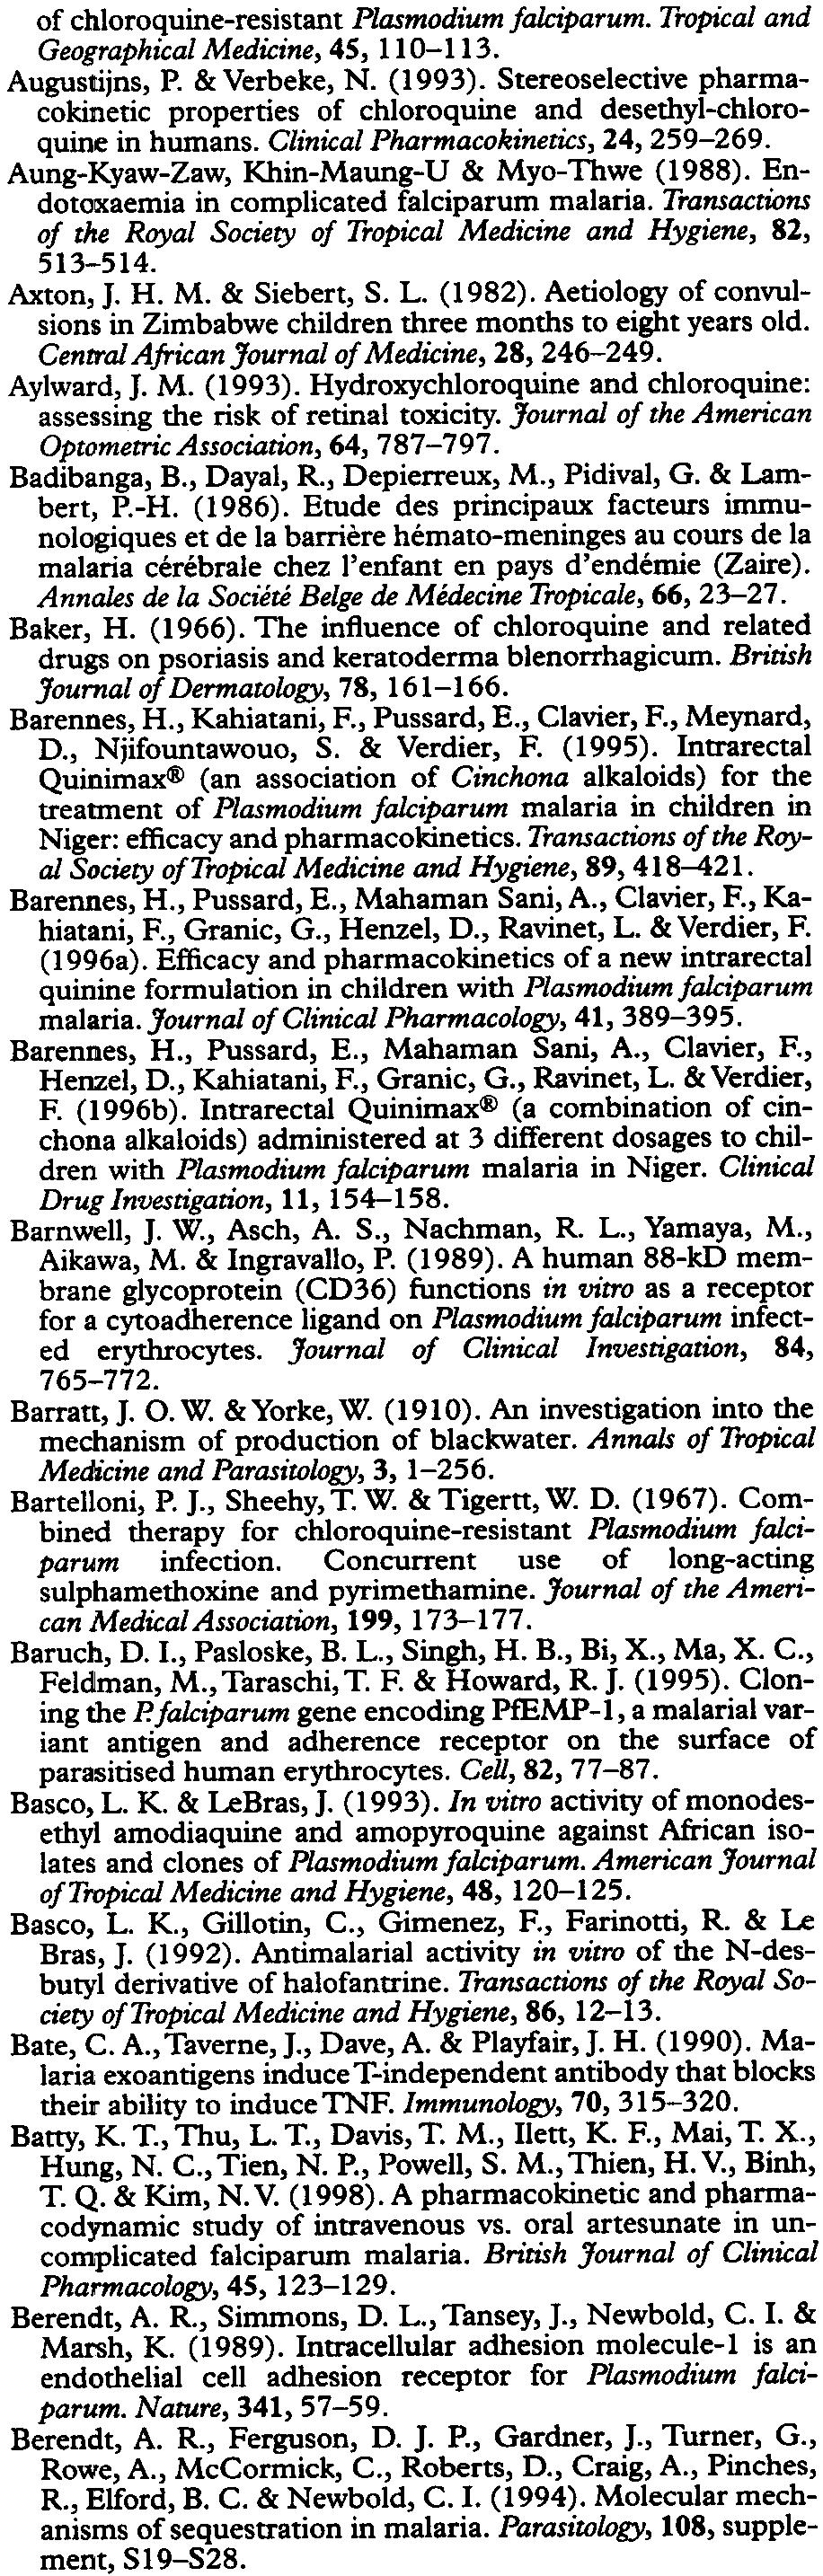 E. & Ali, M. E. (1997). Post-malarial cerebellar ataxia in adult Sudanese patients. East African Medical Journal, 74, 570-572. Abila, B. & Ikueze, R. ( 1989).